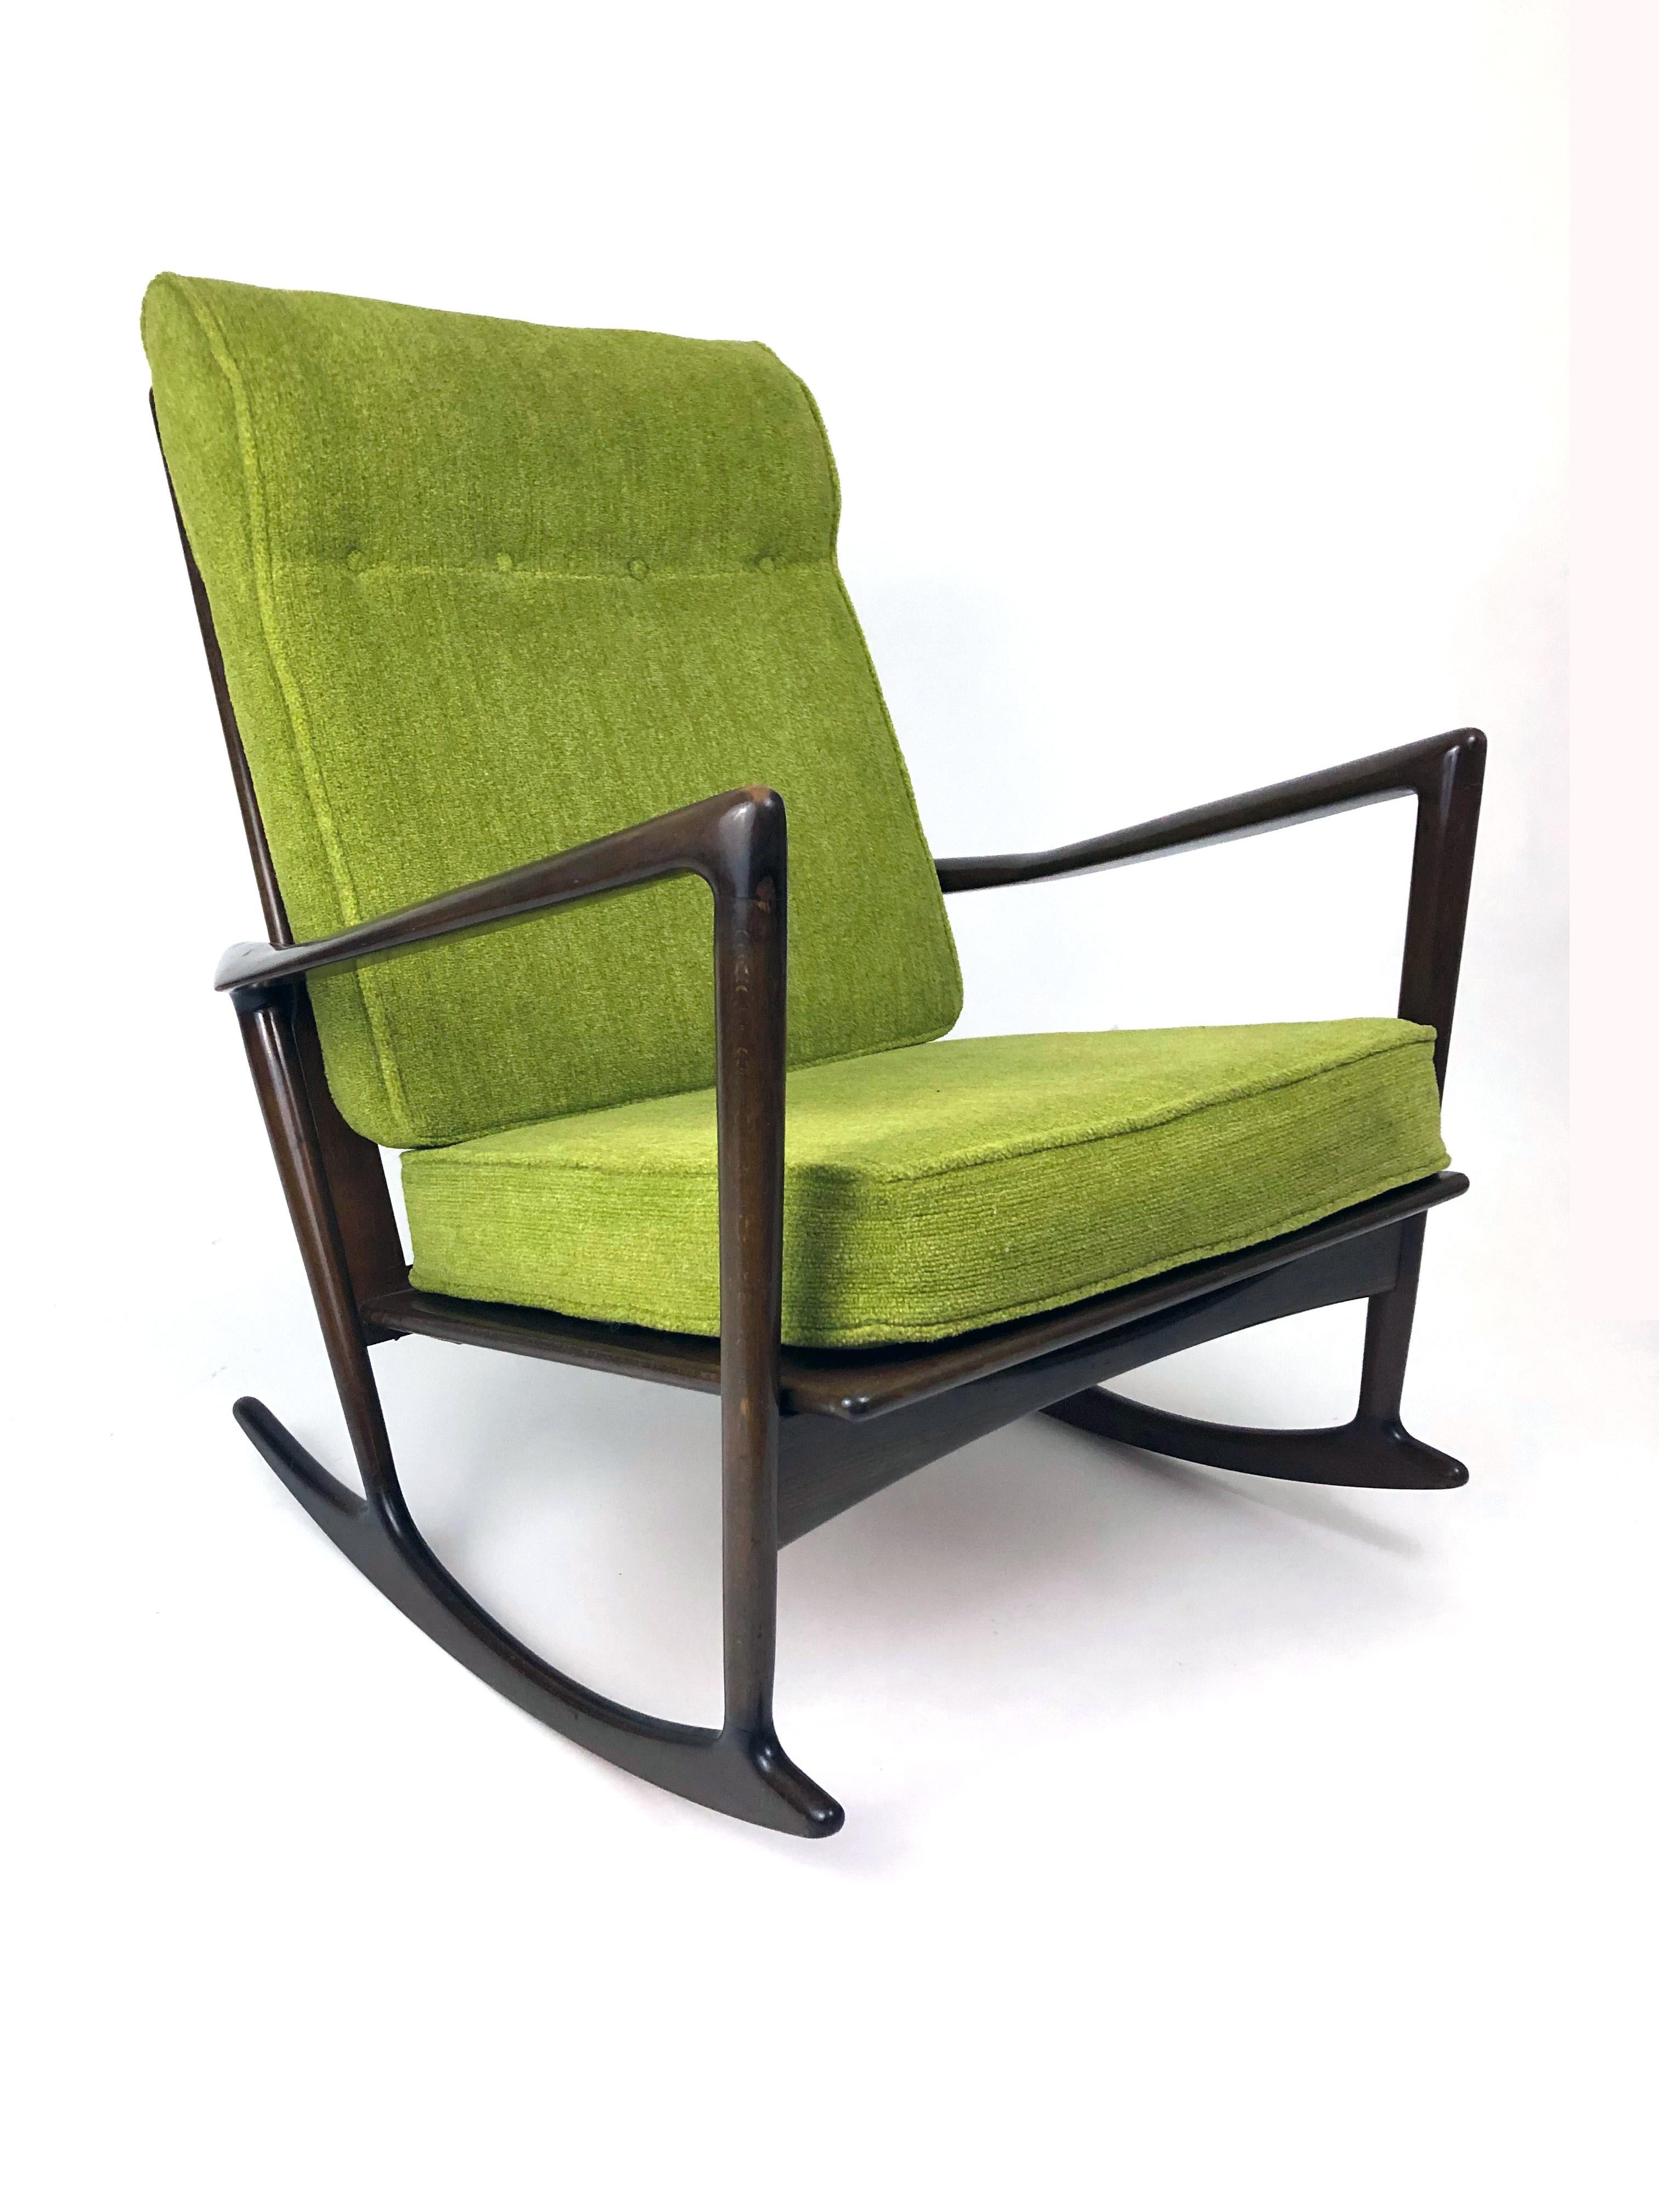 A dark walnut sculptural rocking chair designed by Ib Kofod-Larsen in 1962 for Christian Linnebergs Møbelfabrik. Imported to the U.S. by Selig.